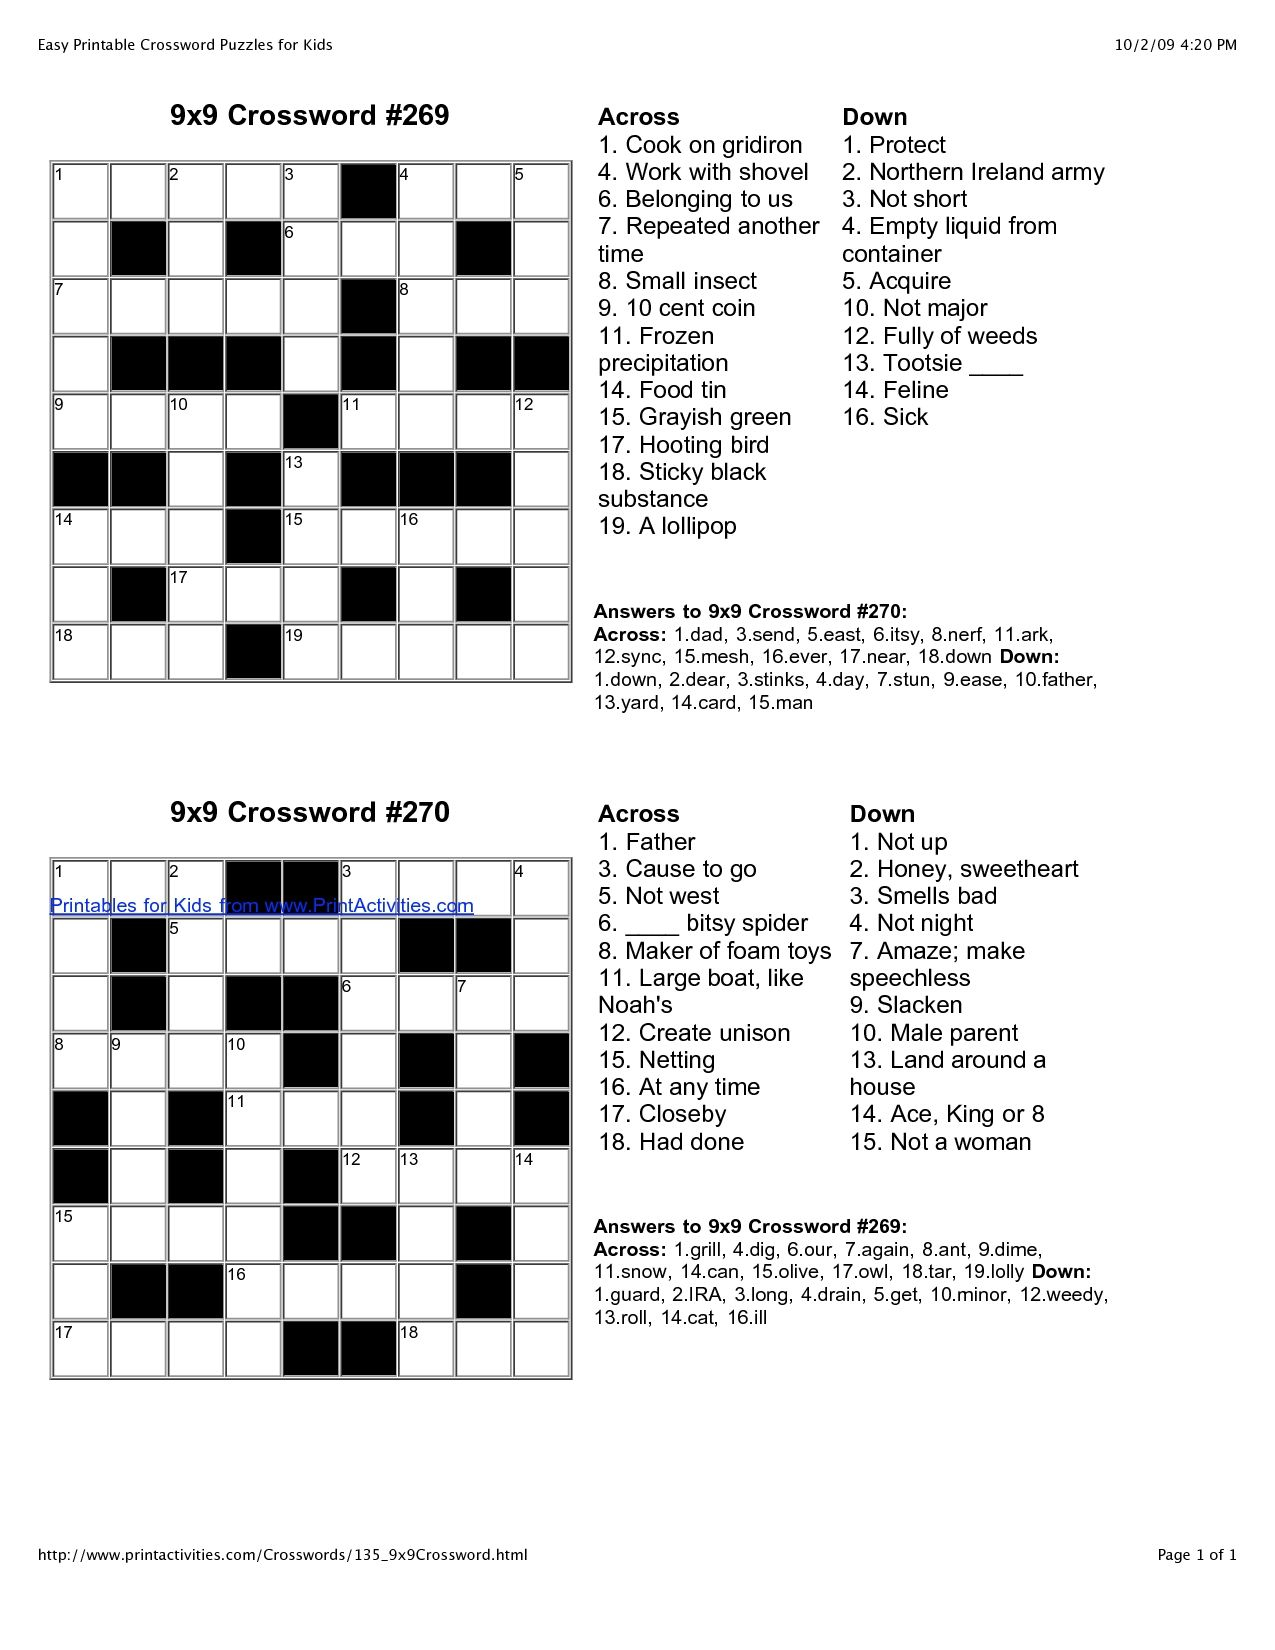 Easy Crossword Puzzles Printable With Answers